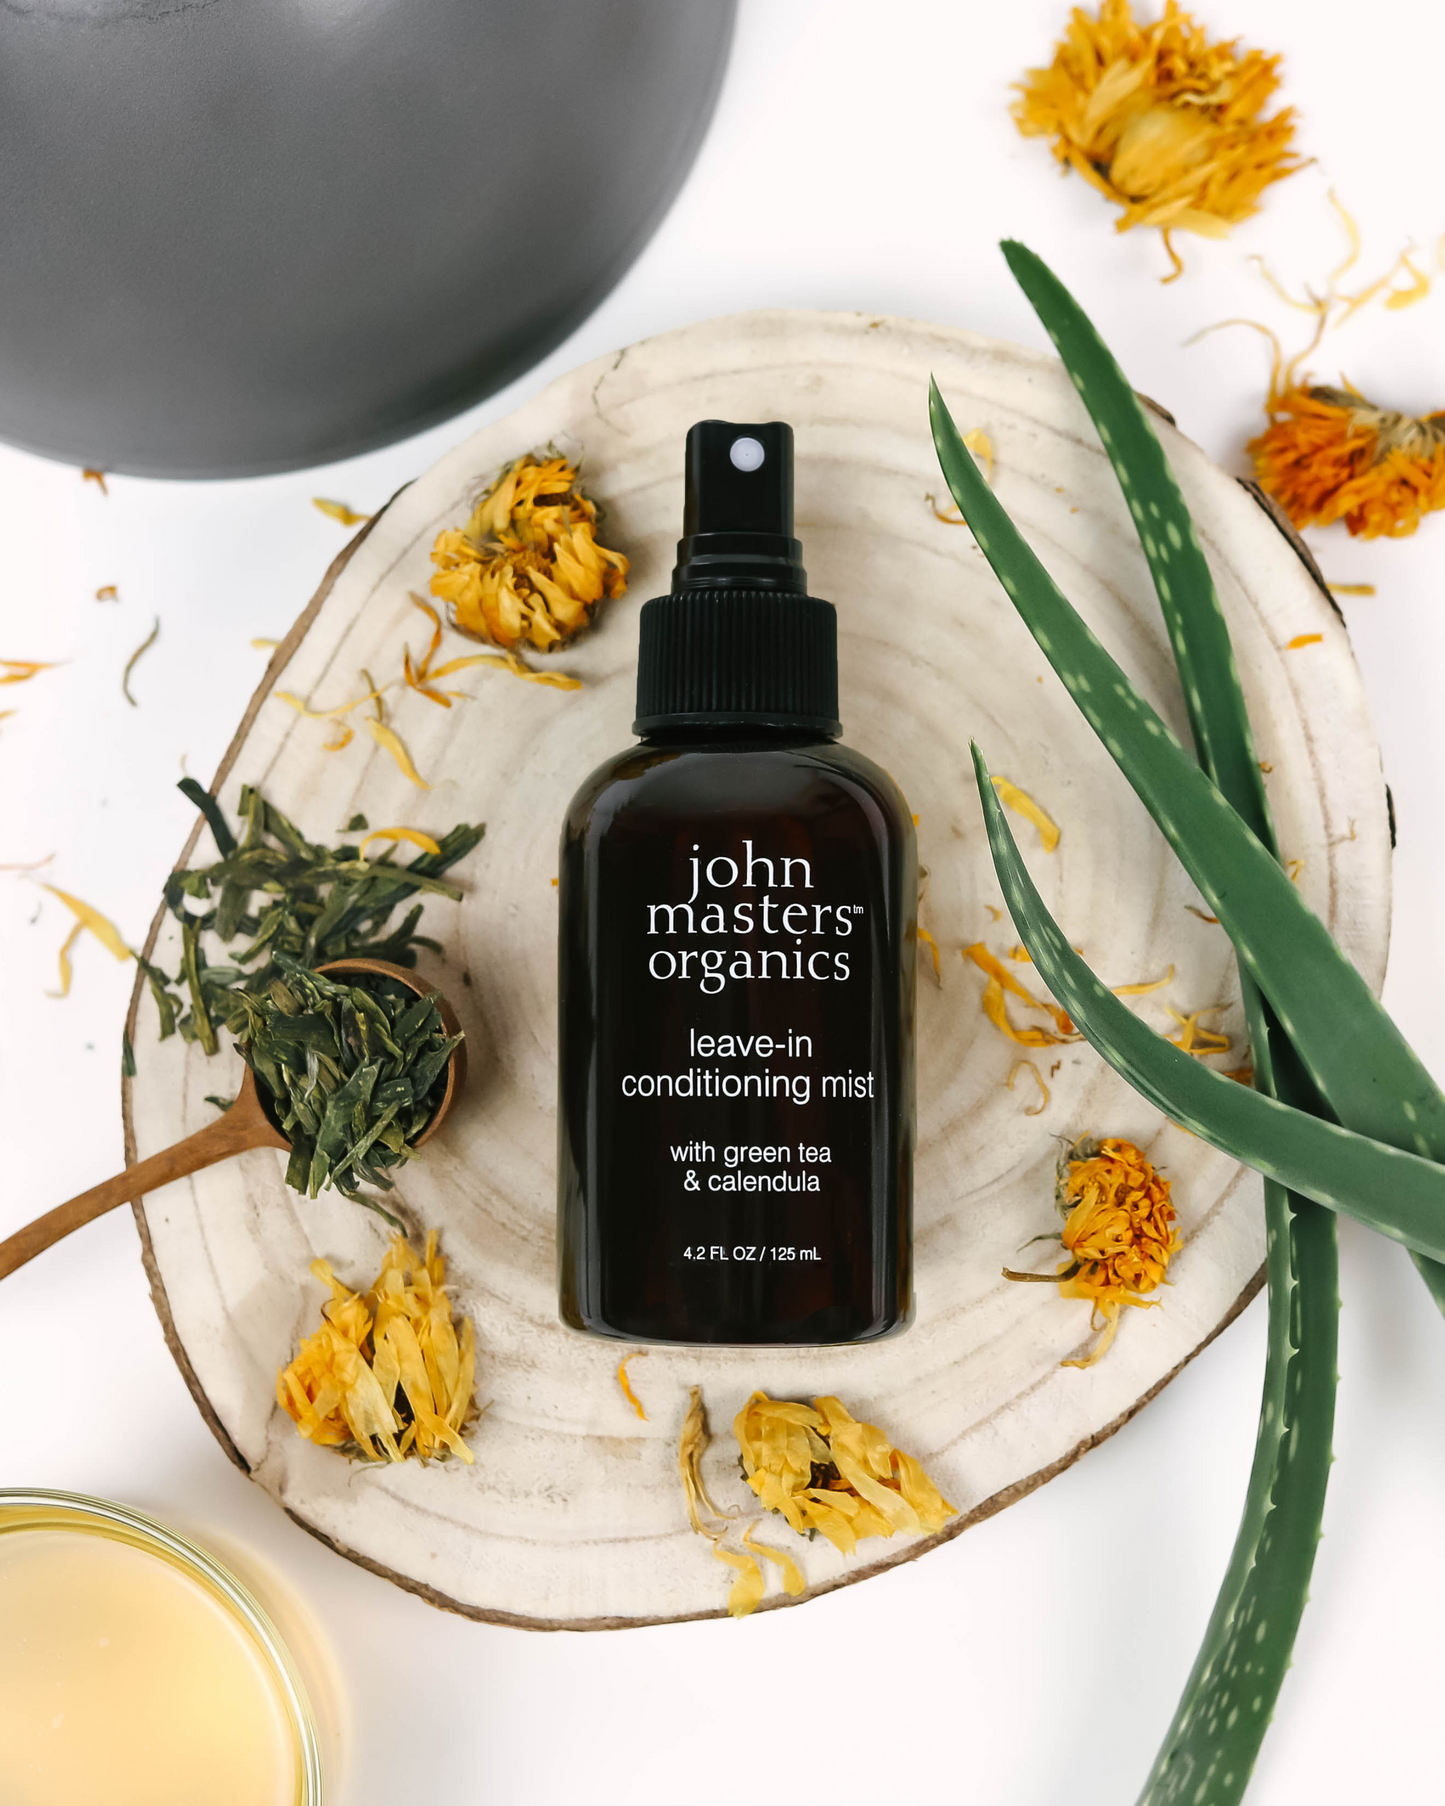 Leave-in Conditioning Mist with Green Tea & Calendula